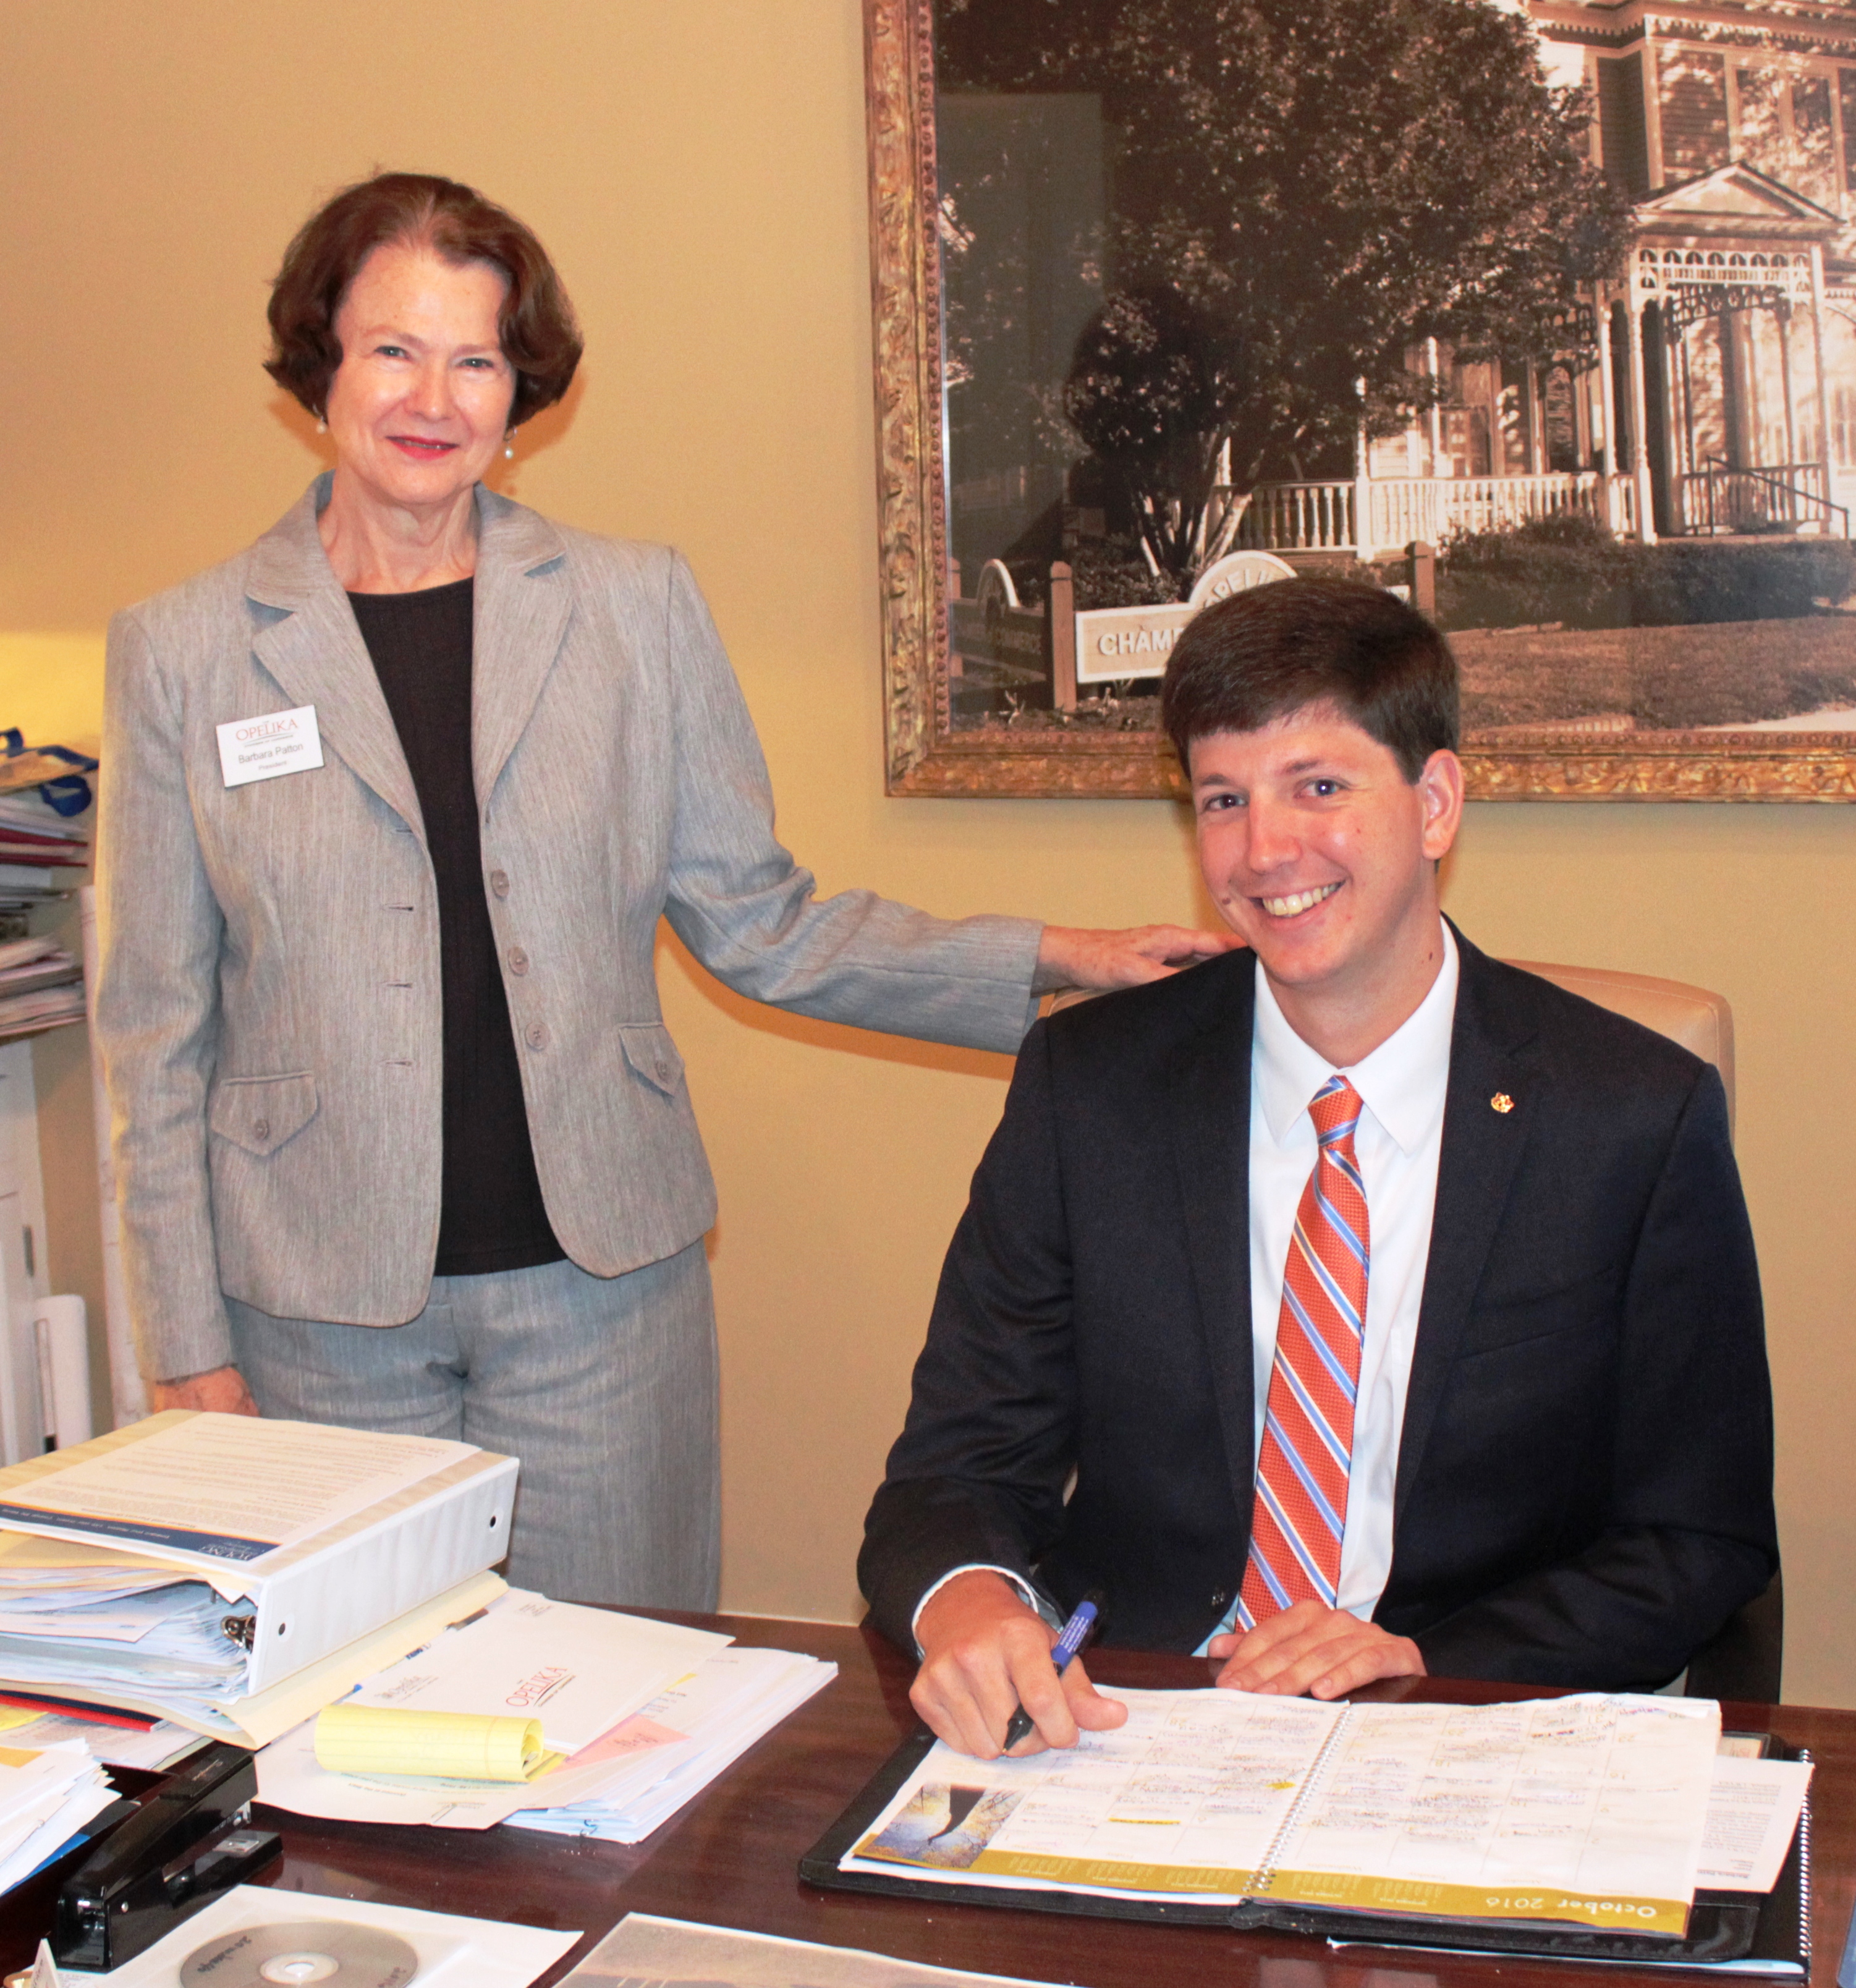 Cotton farmer becomes chamber president for a day